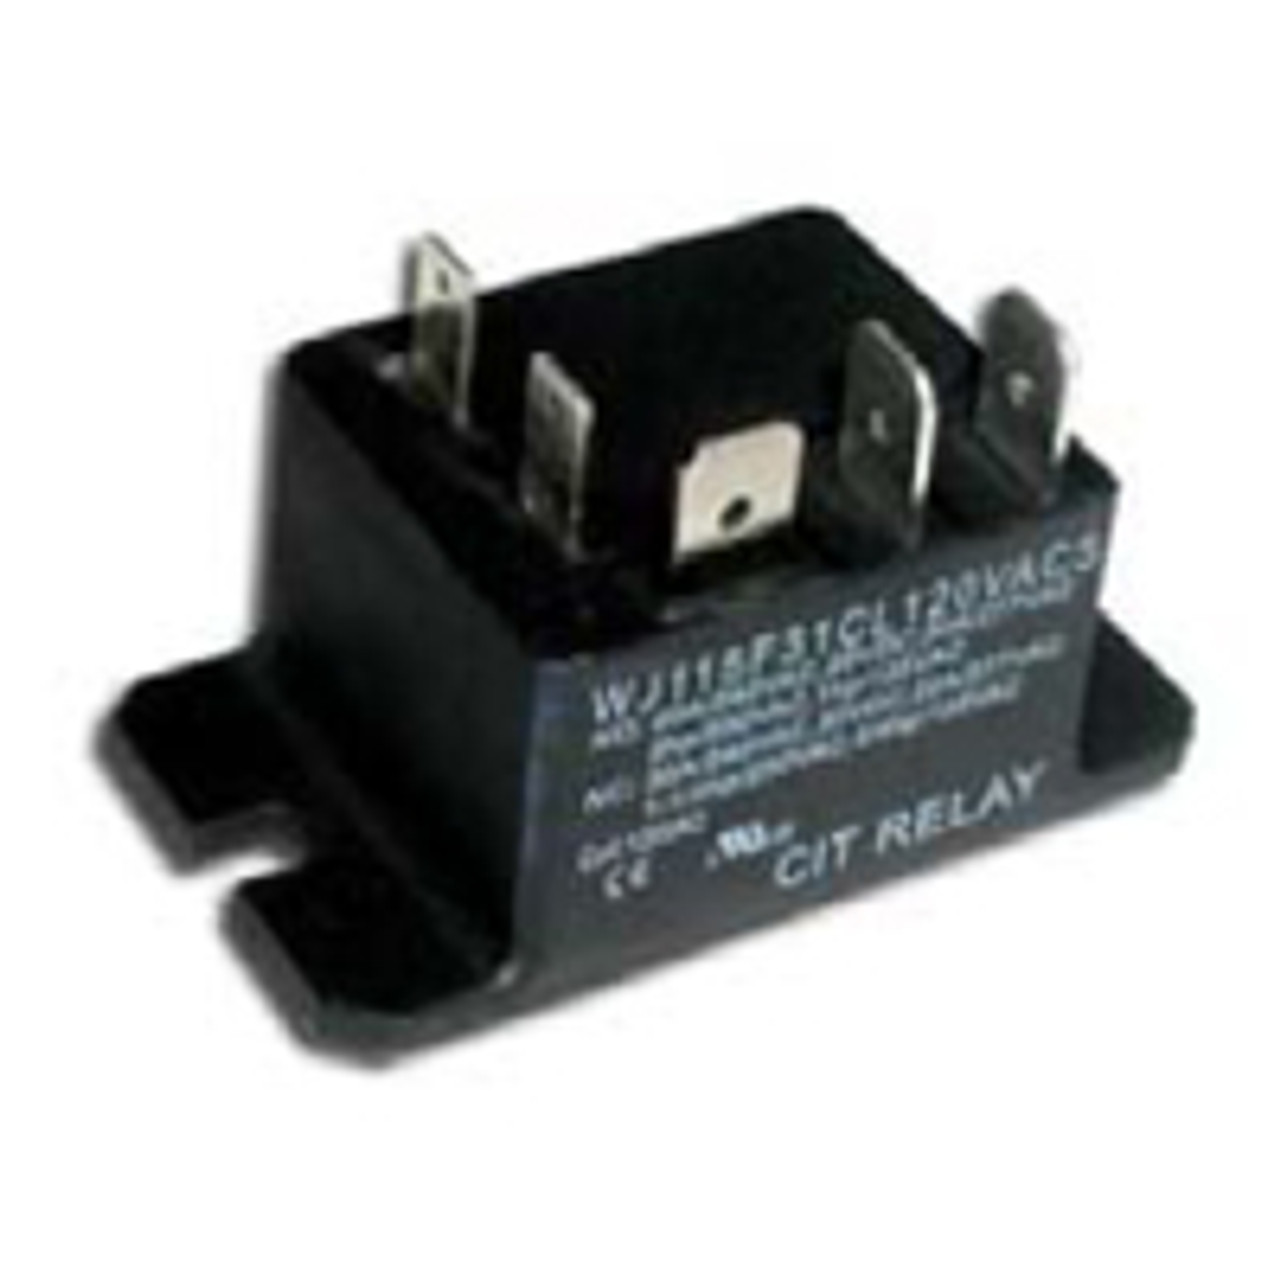 CIT Relay and Switch J115F31AL12VACSU Power Relays